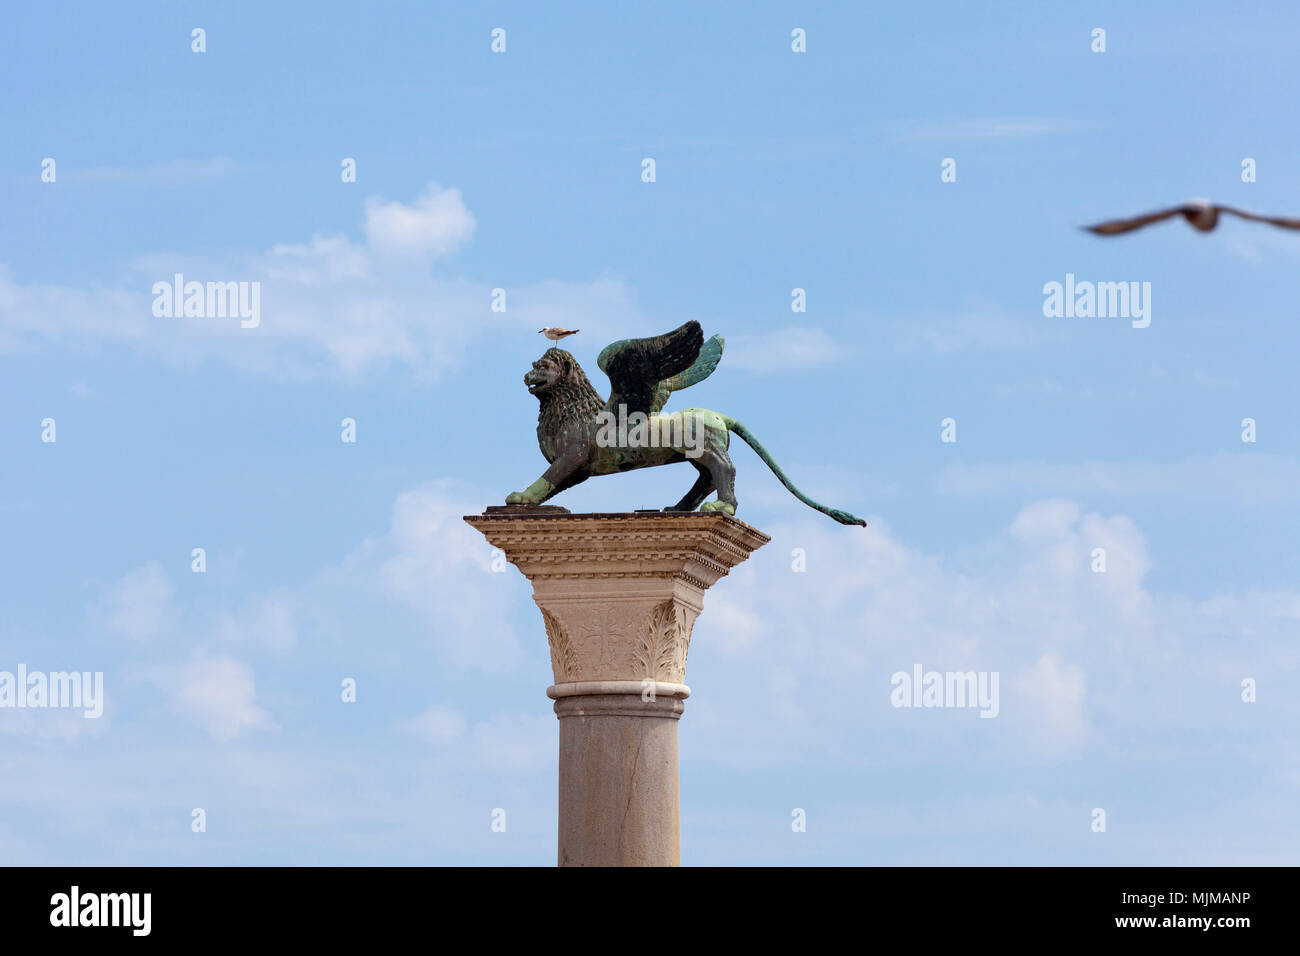 Statue of winged lion with seagulls, St Marks Square, Venice Stock Photo